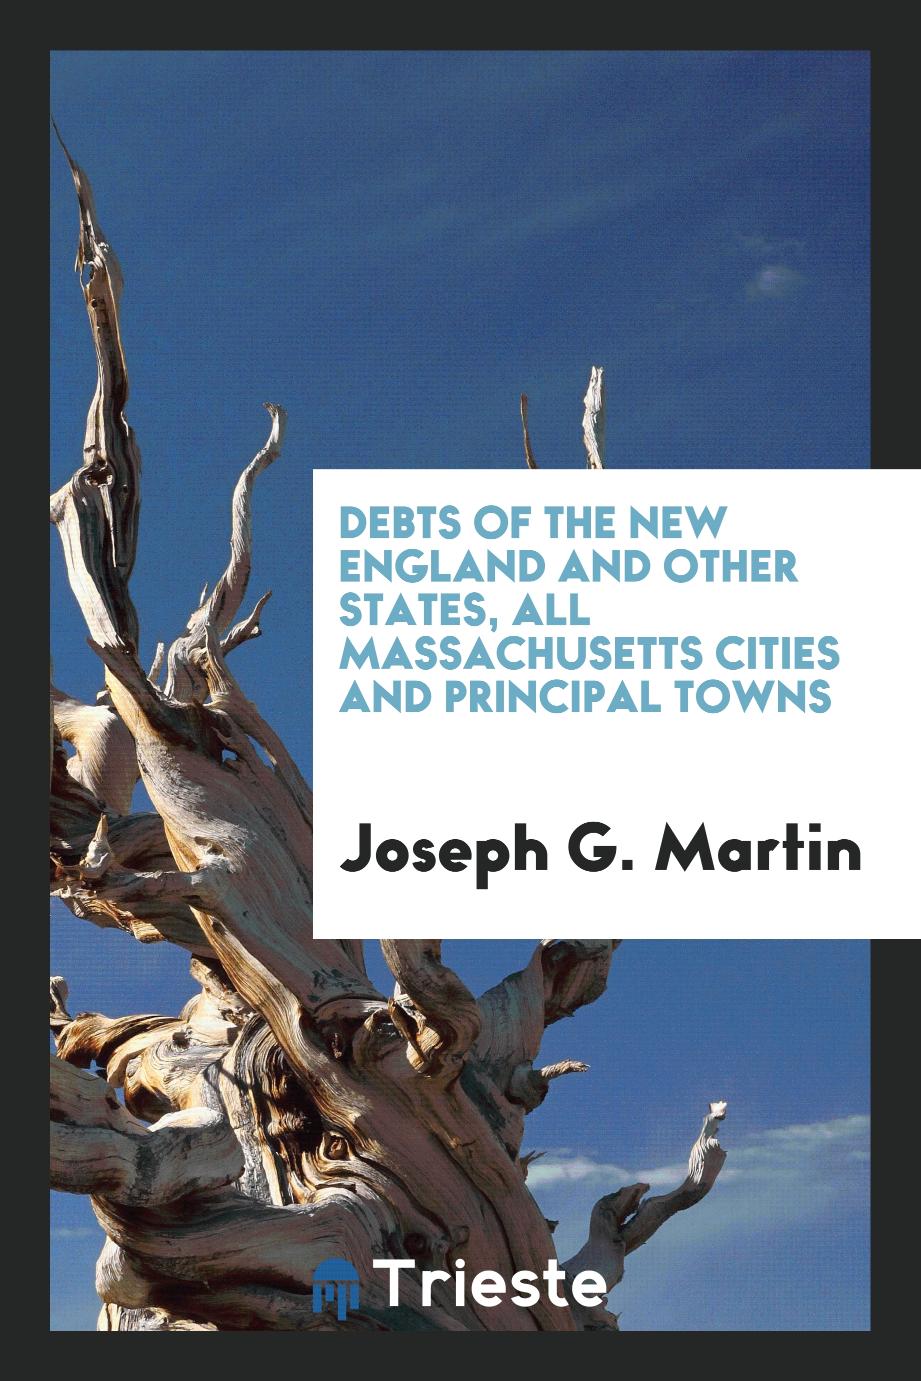 Debts of the New England and Other States, All Massachusetts Cities and principal towns